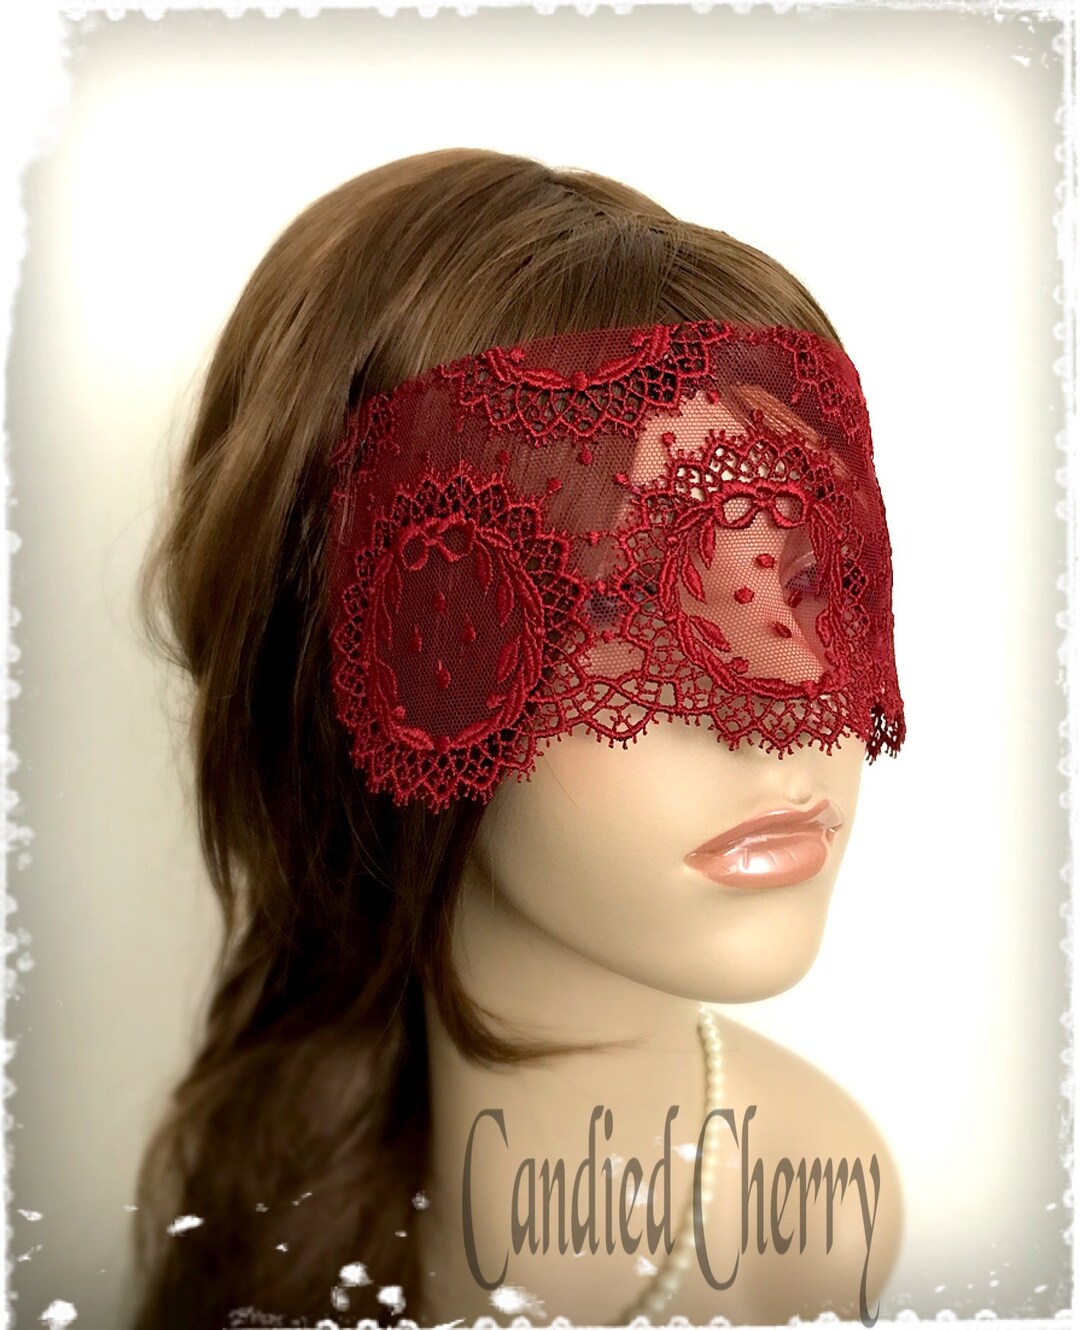 Deep Red Arabesque Lace Mask Veil Mysterious Masquerade Ball - Etsy